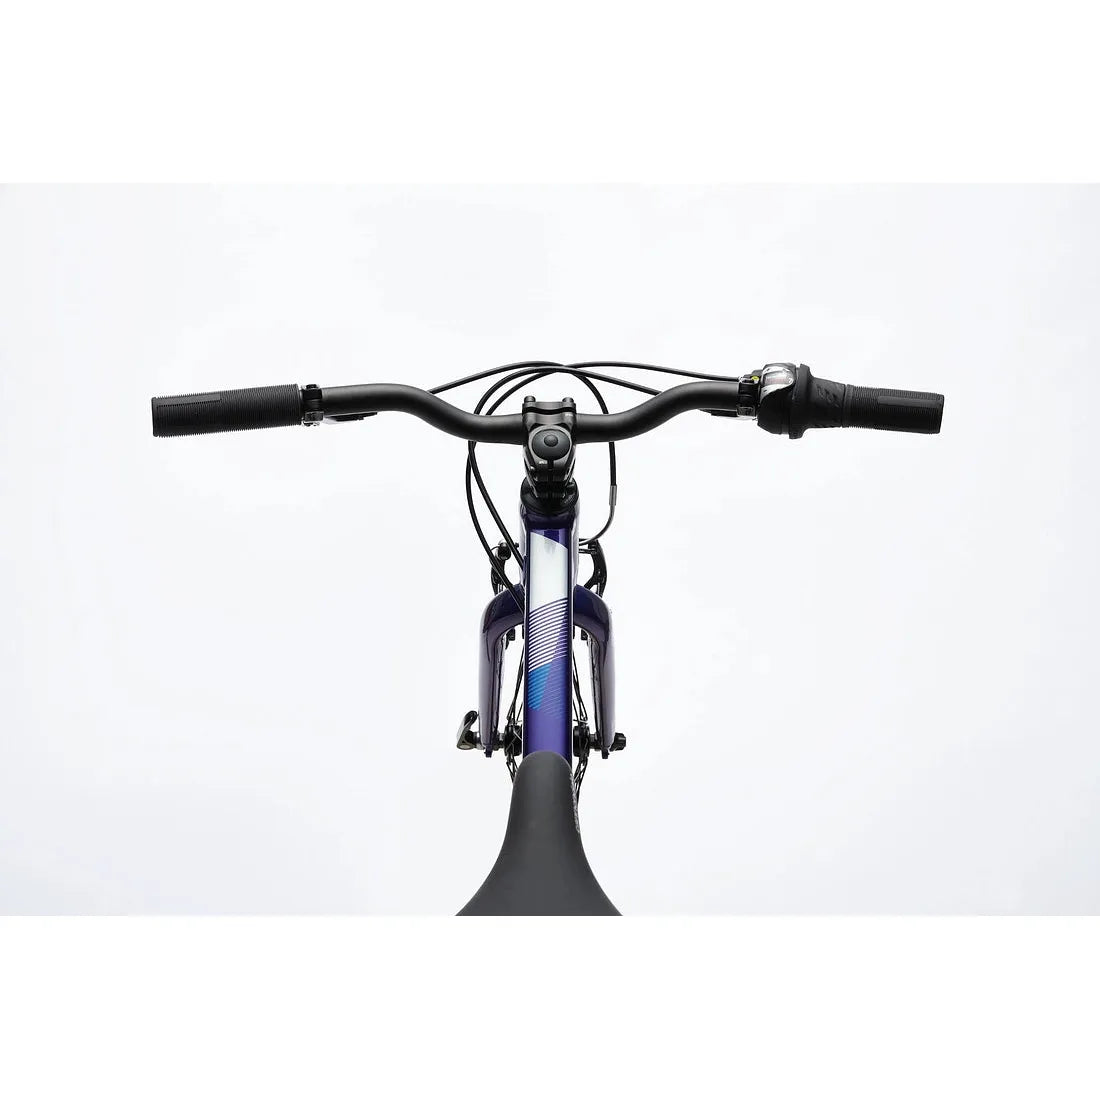 Cannondale Kids quick 20'' Girl's